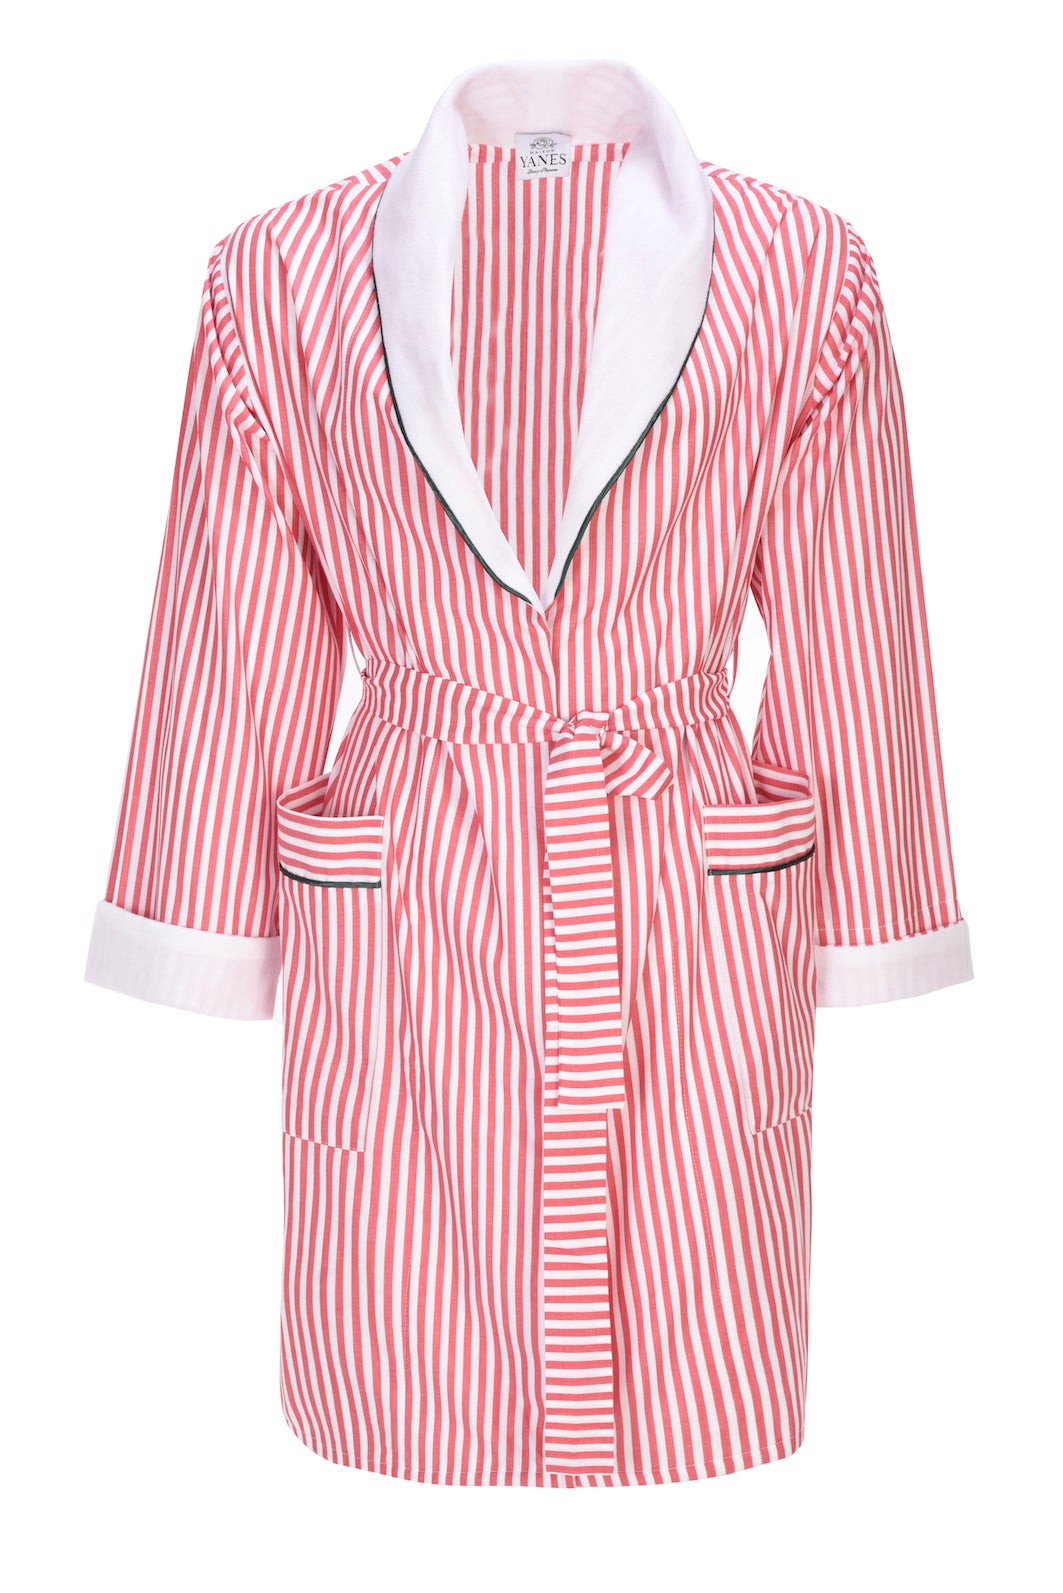 Red Striped Women's Dressing Gown